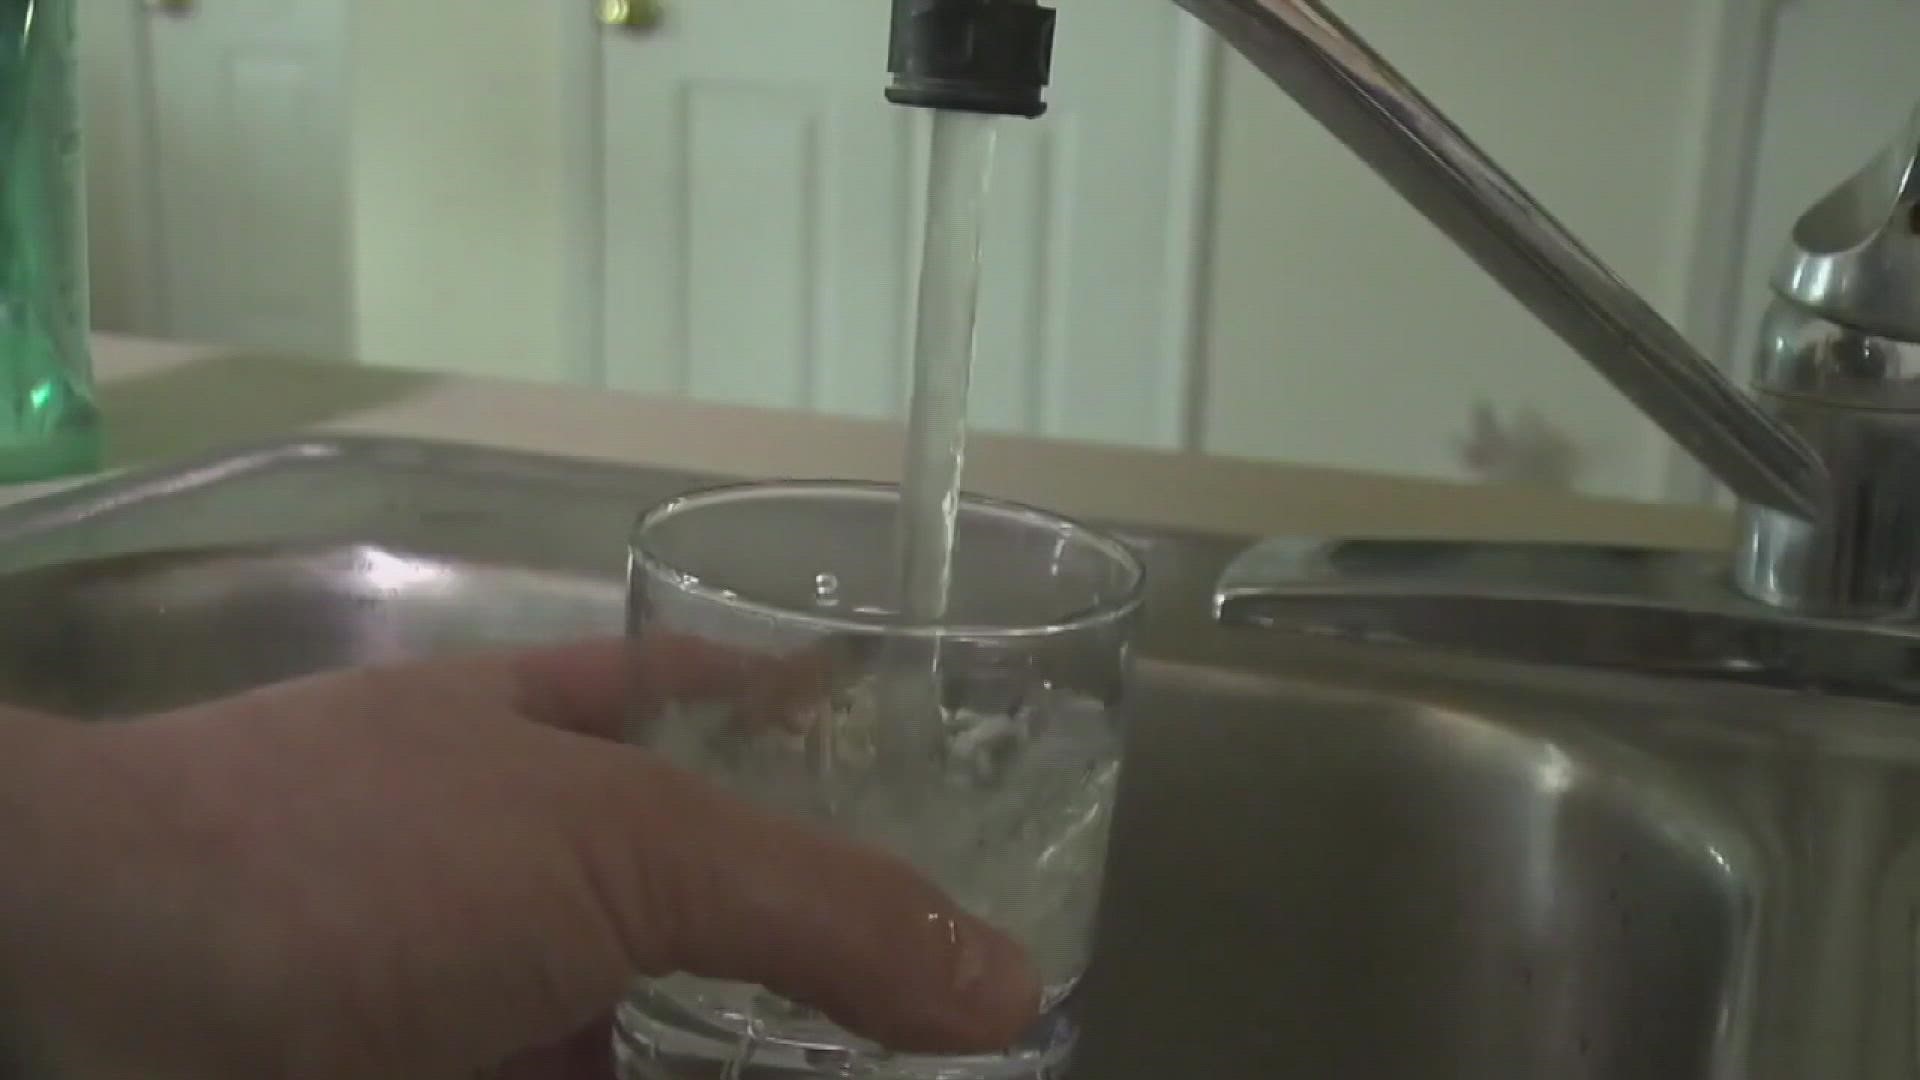 Health department officials recommend getting your body's lead levels tested by your doctor.